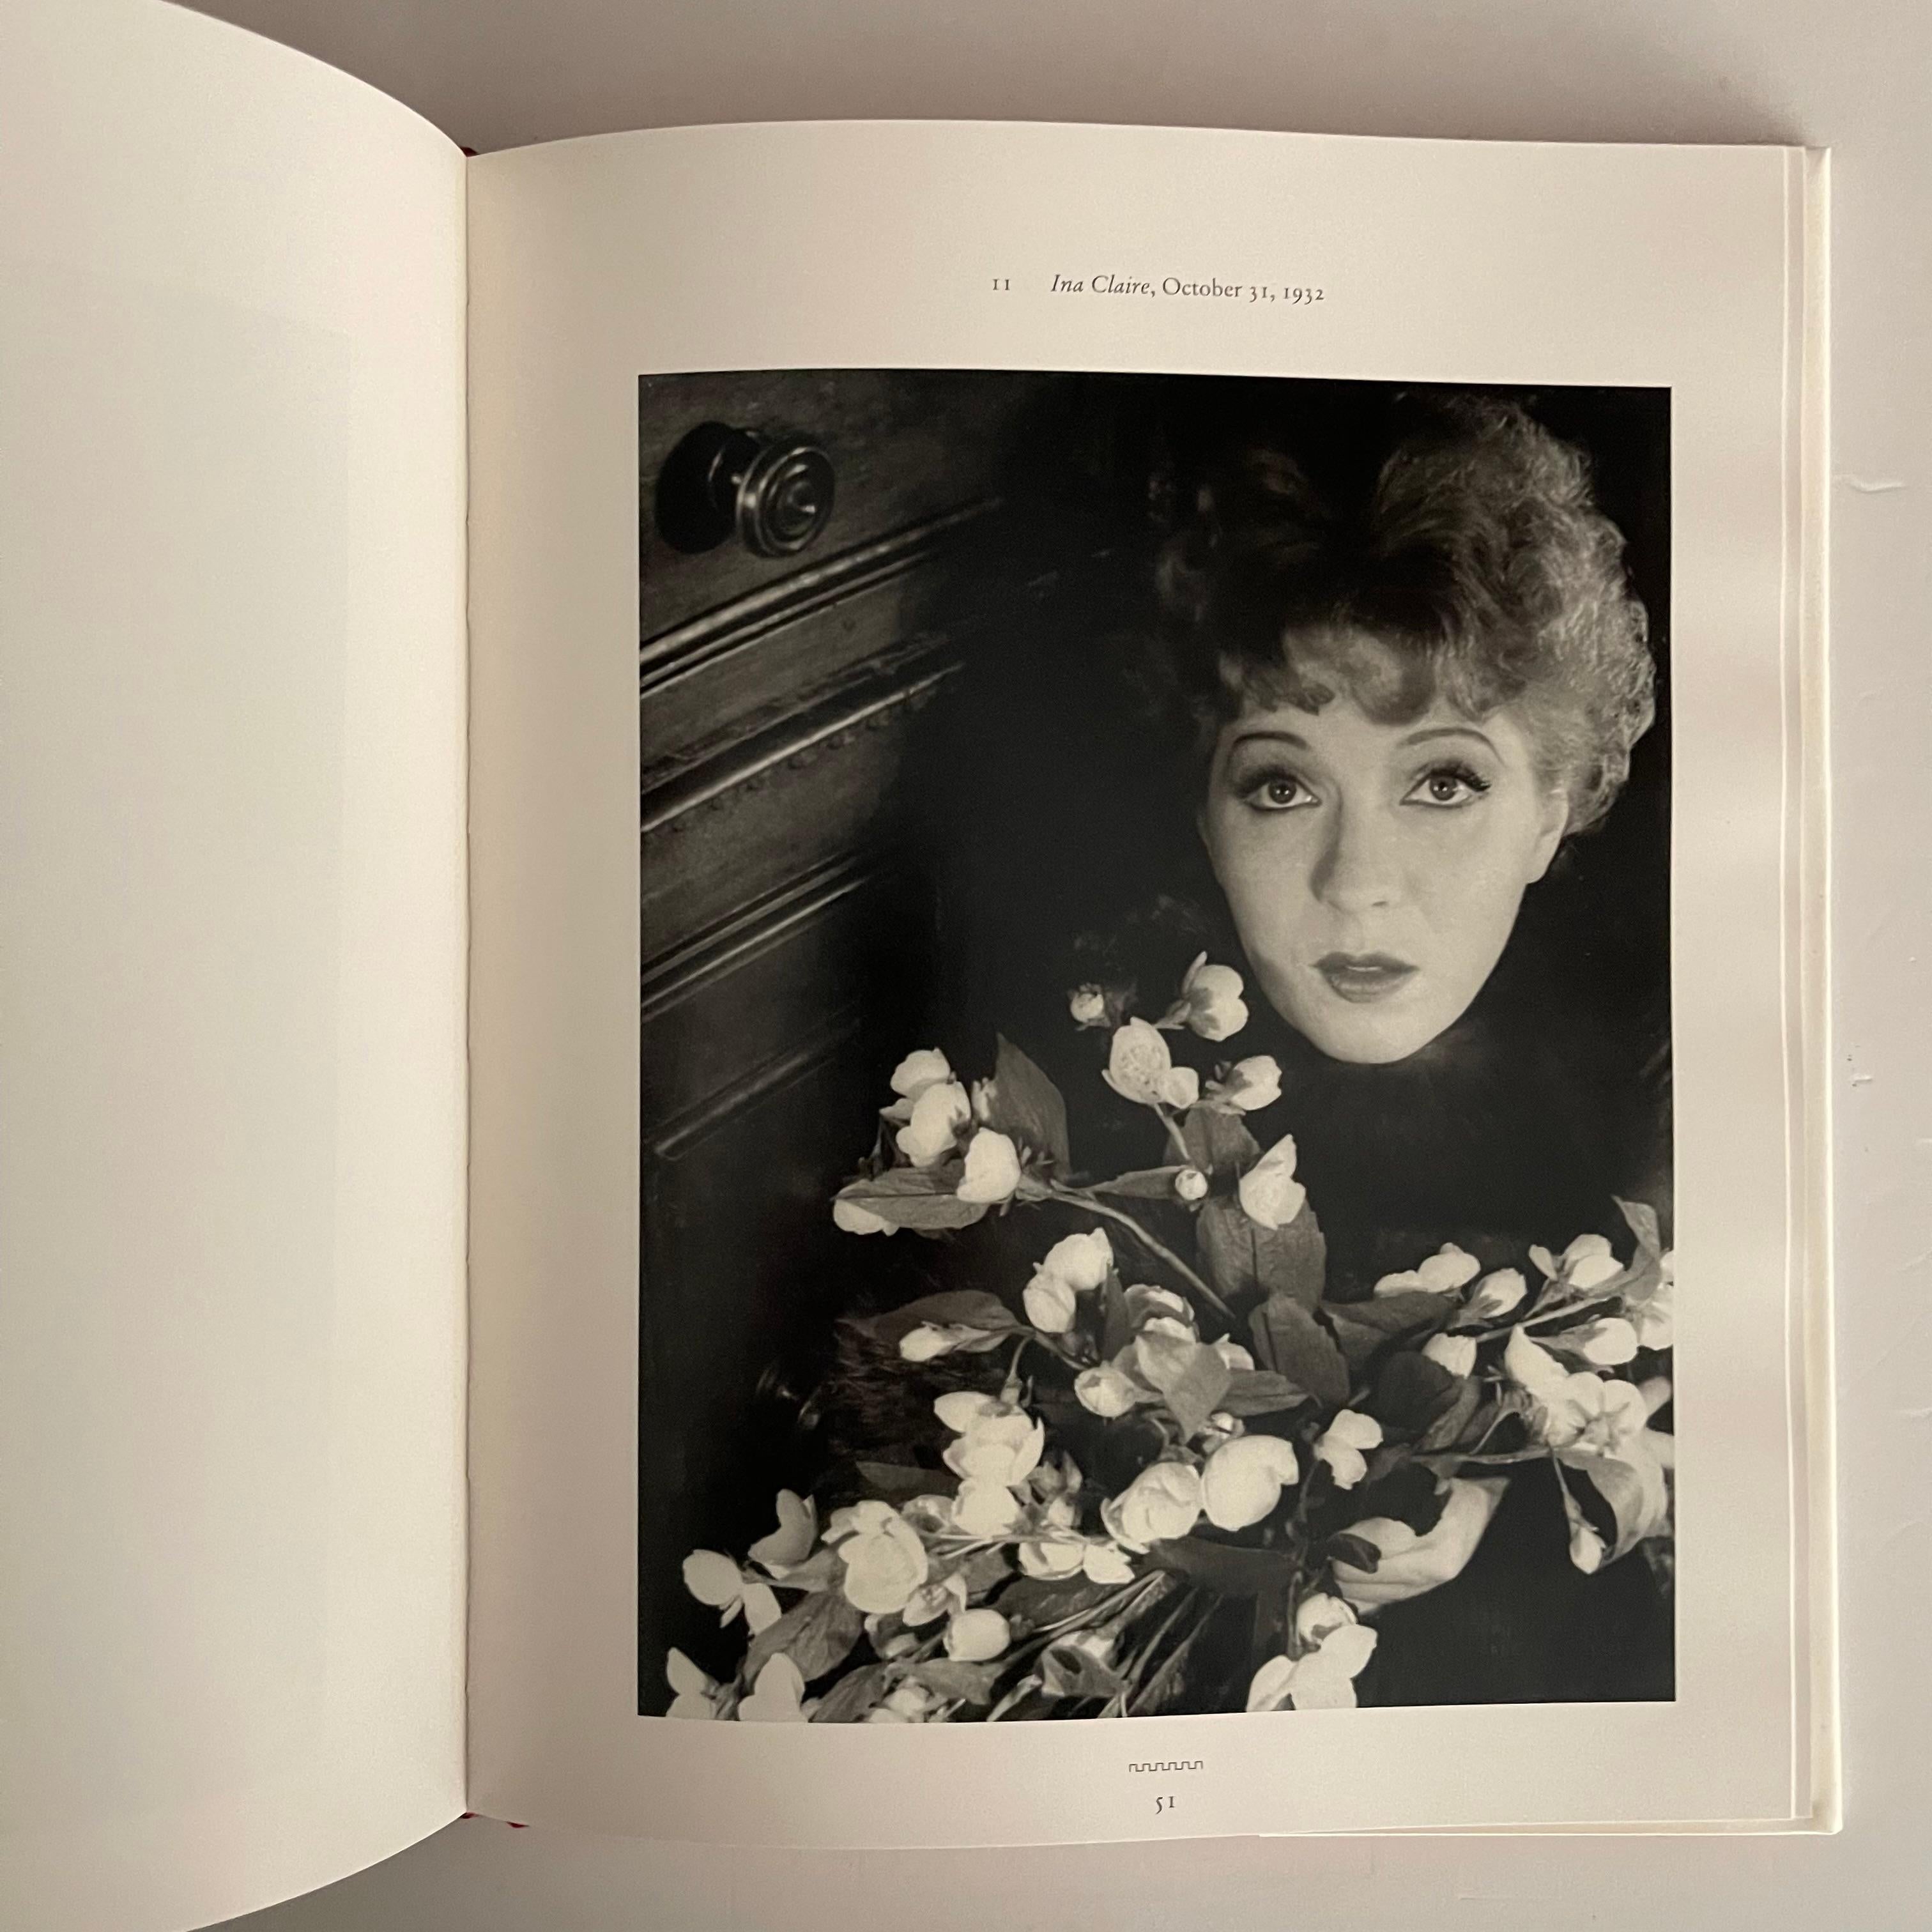 Published by Hallmark Cards, Inc., 1st edition, 1993. Hardback with English text.

Van Vechten turned to photography in 1932 at the age of fifty-one. In his thirty years of photo-taking, he accumulated a distinctive body of work which bears his